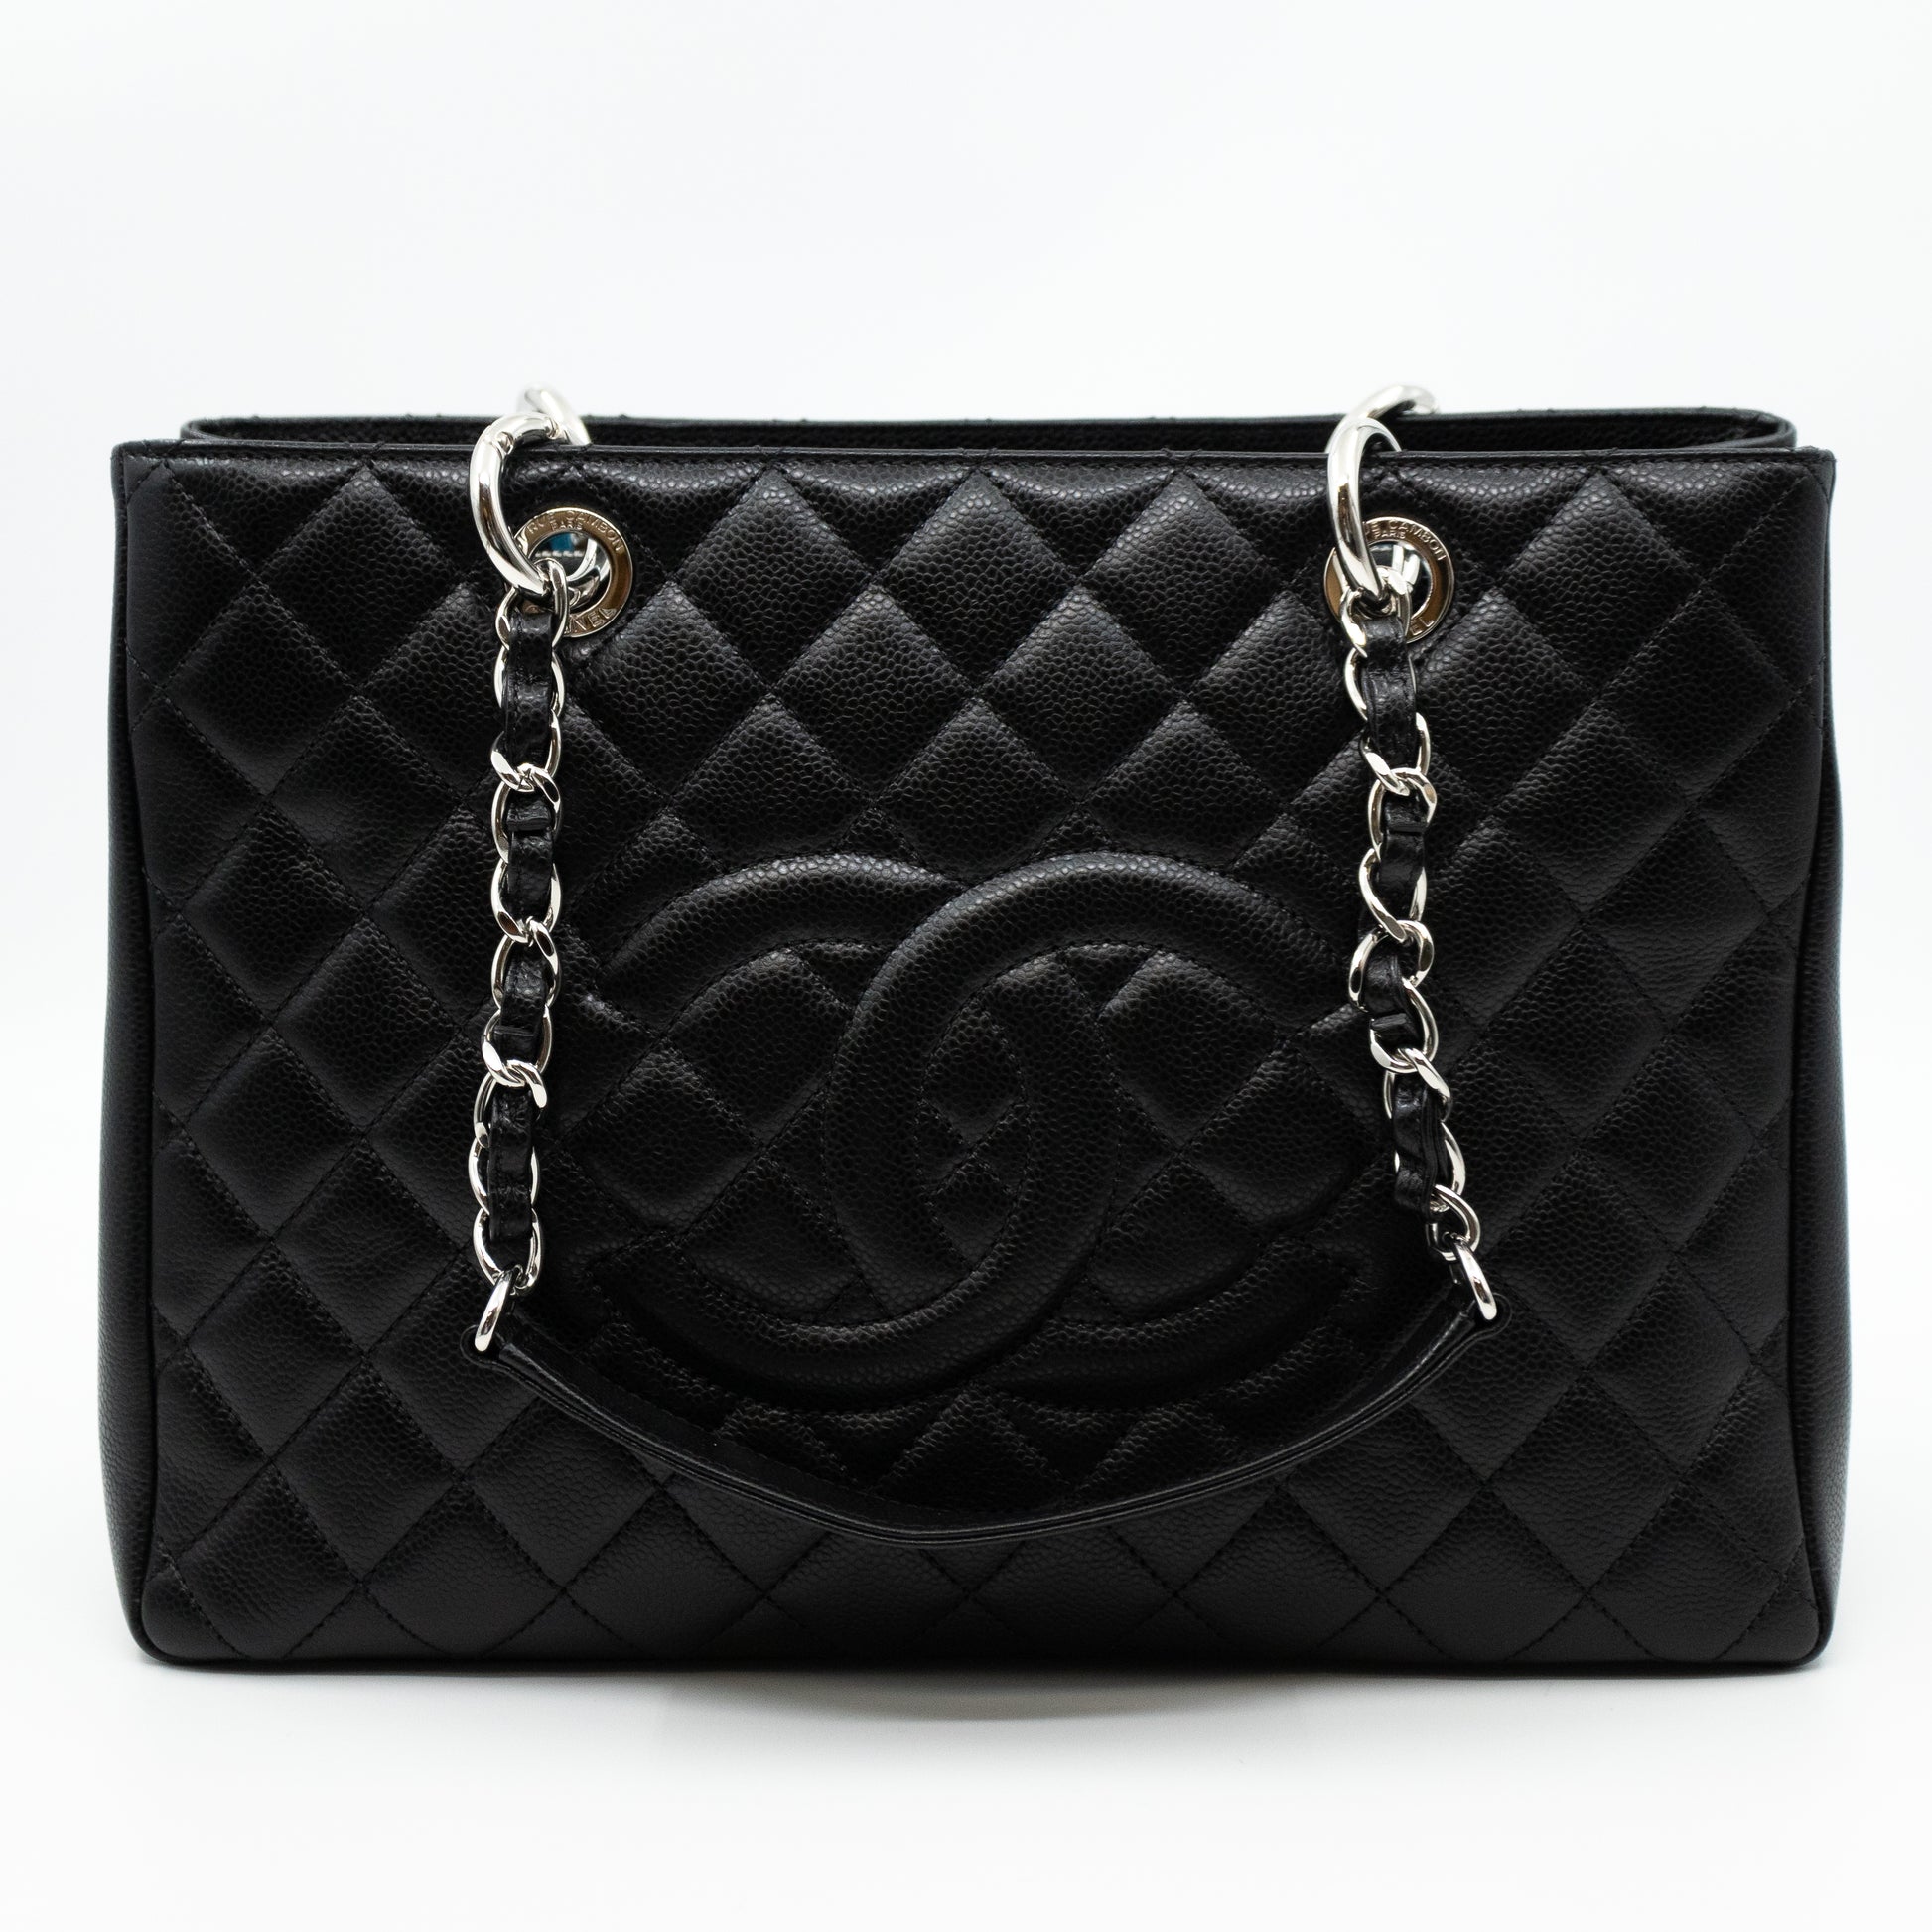 New Work Bag: Chanel GST Review